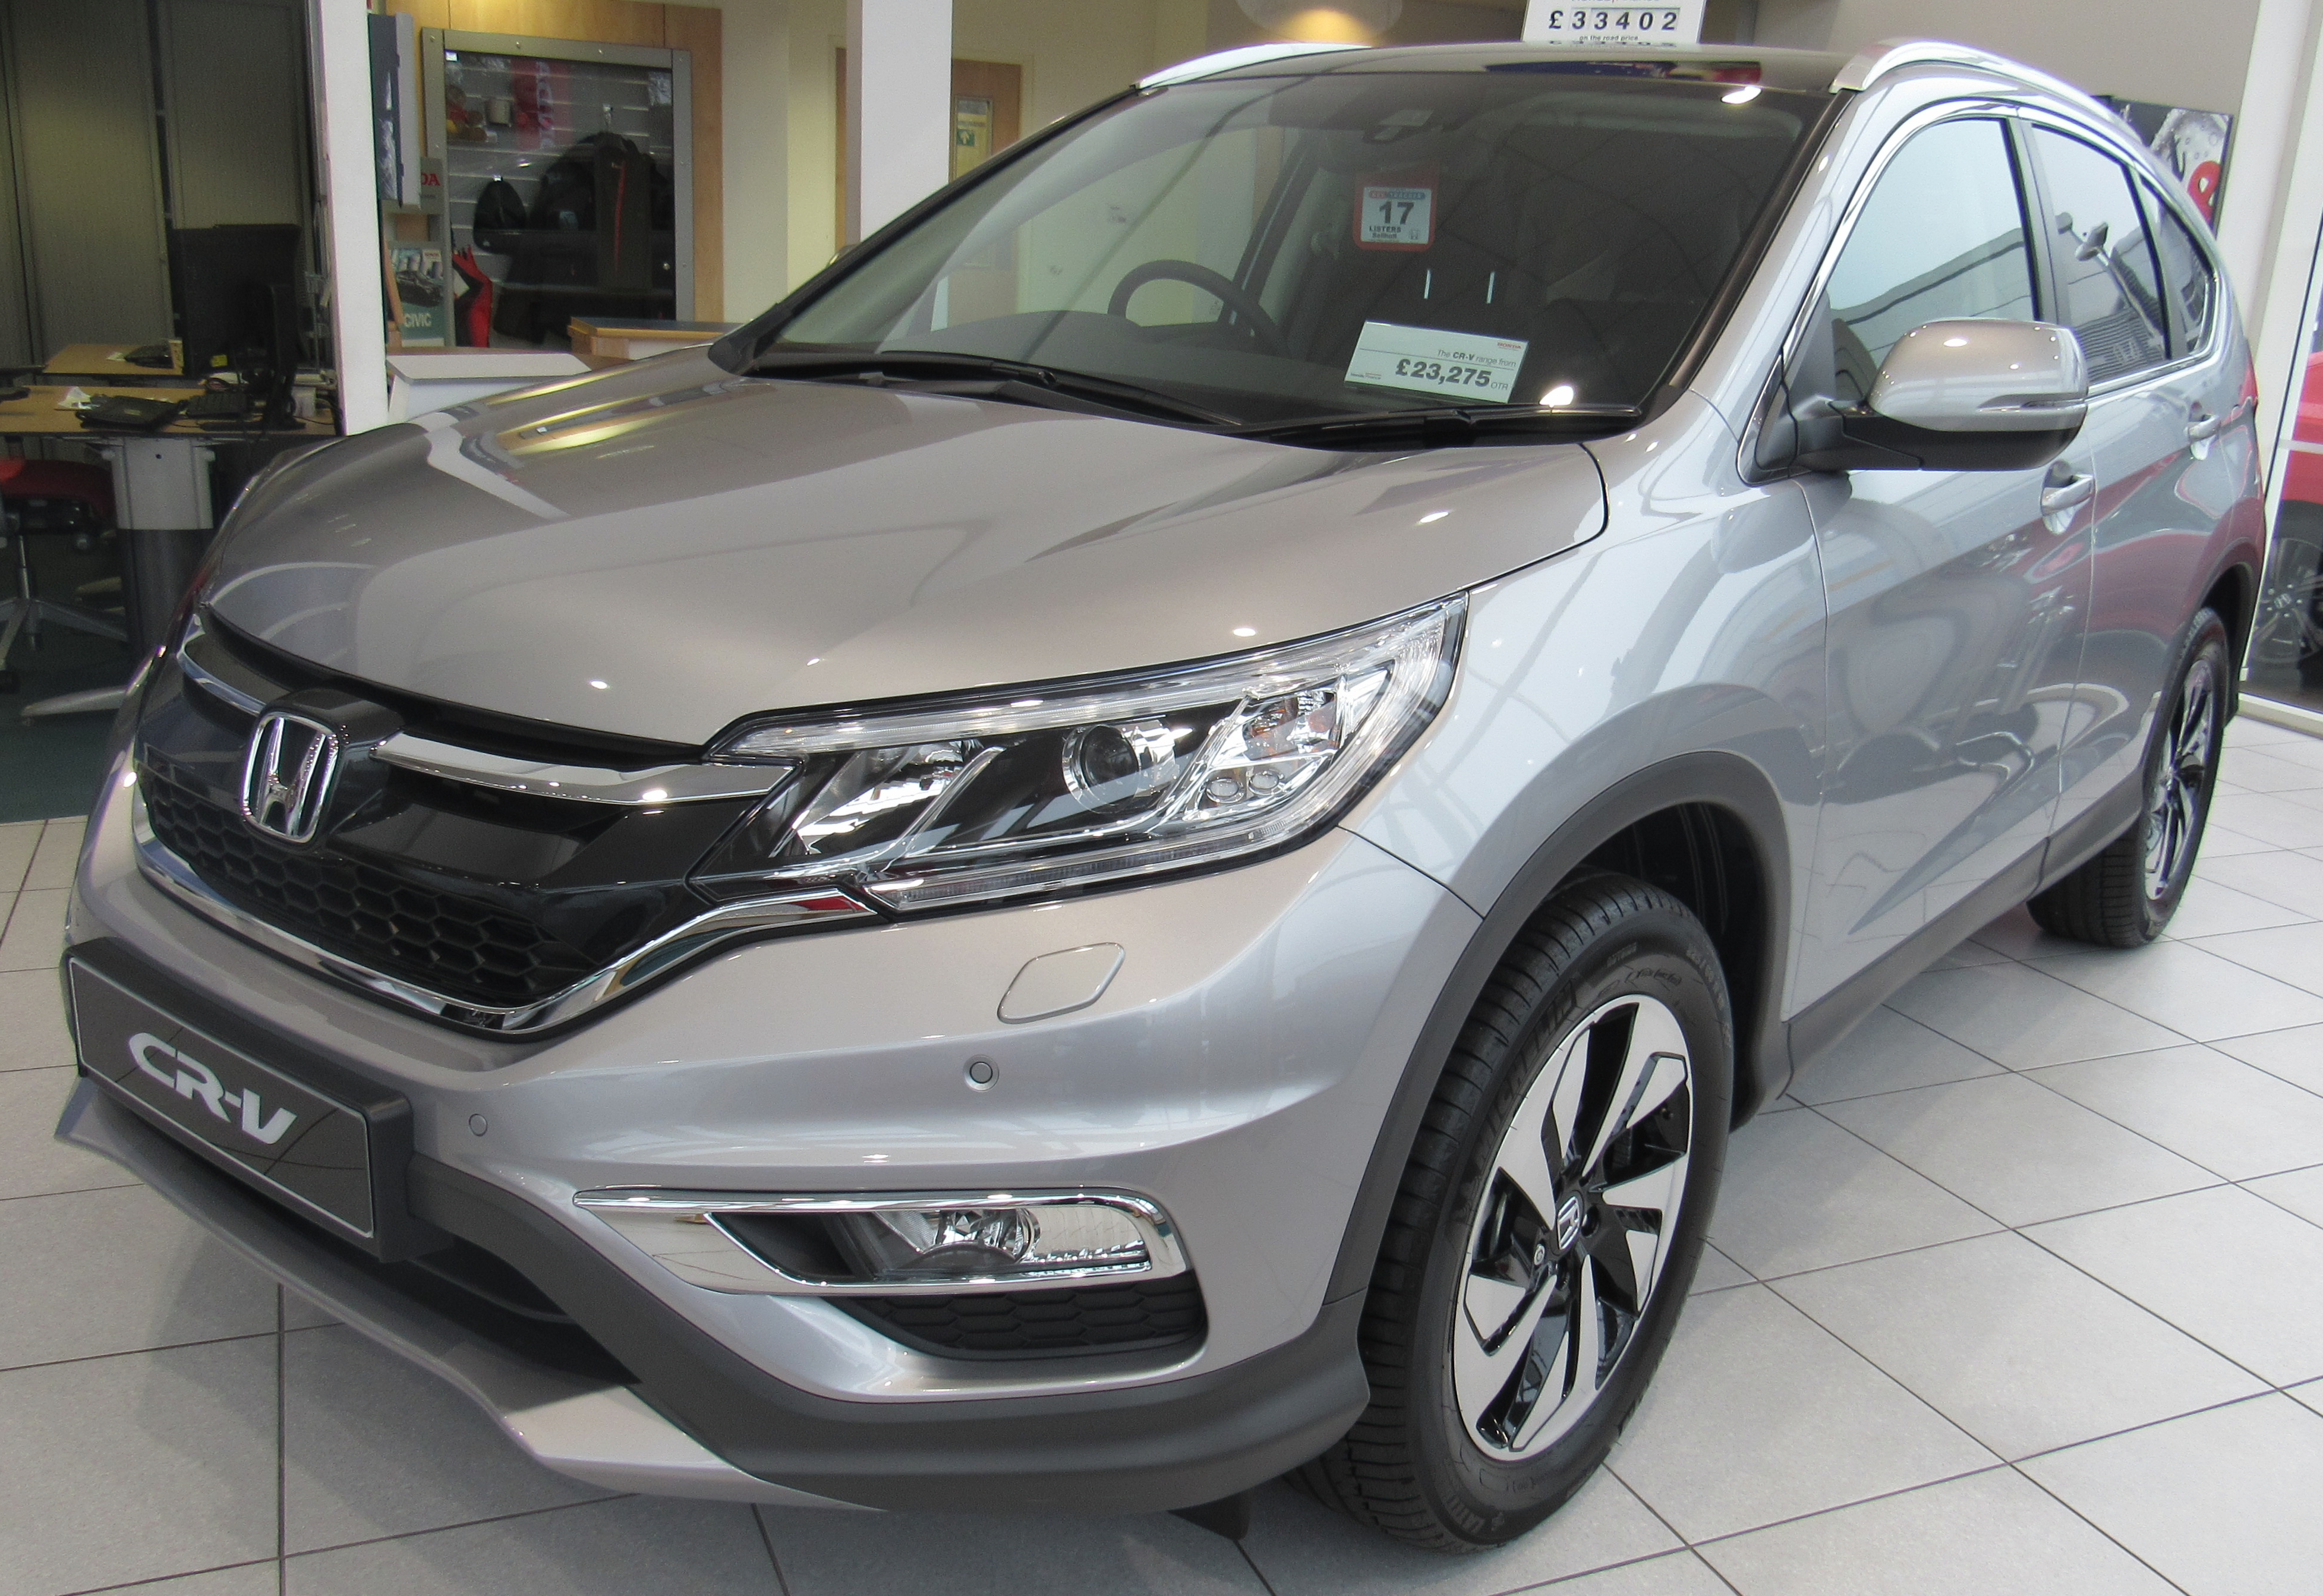 2017 Honda CRV Specifications, Pricing, Pictures and Videos